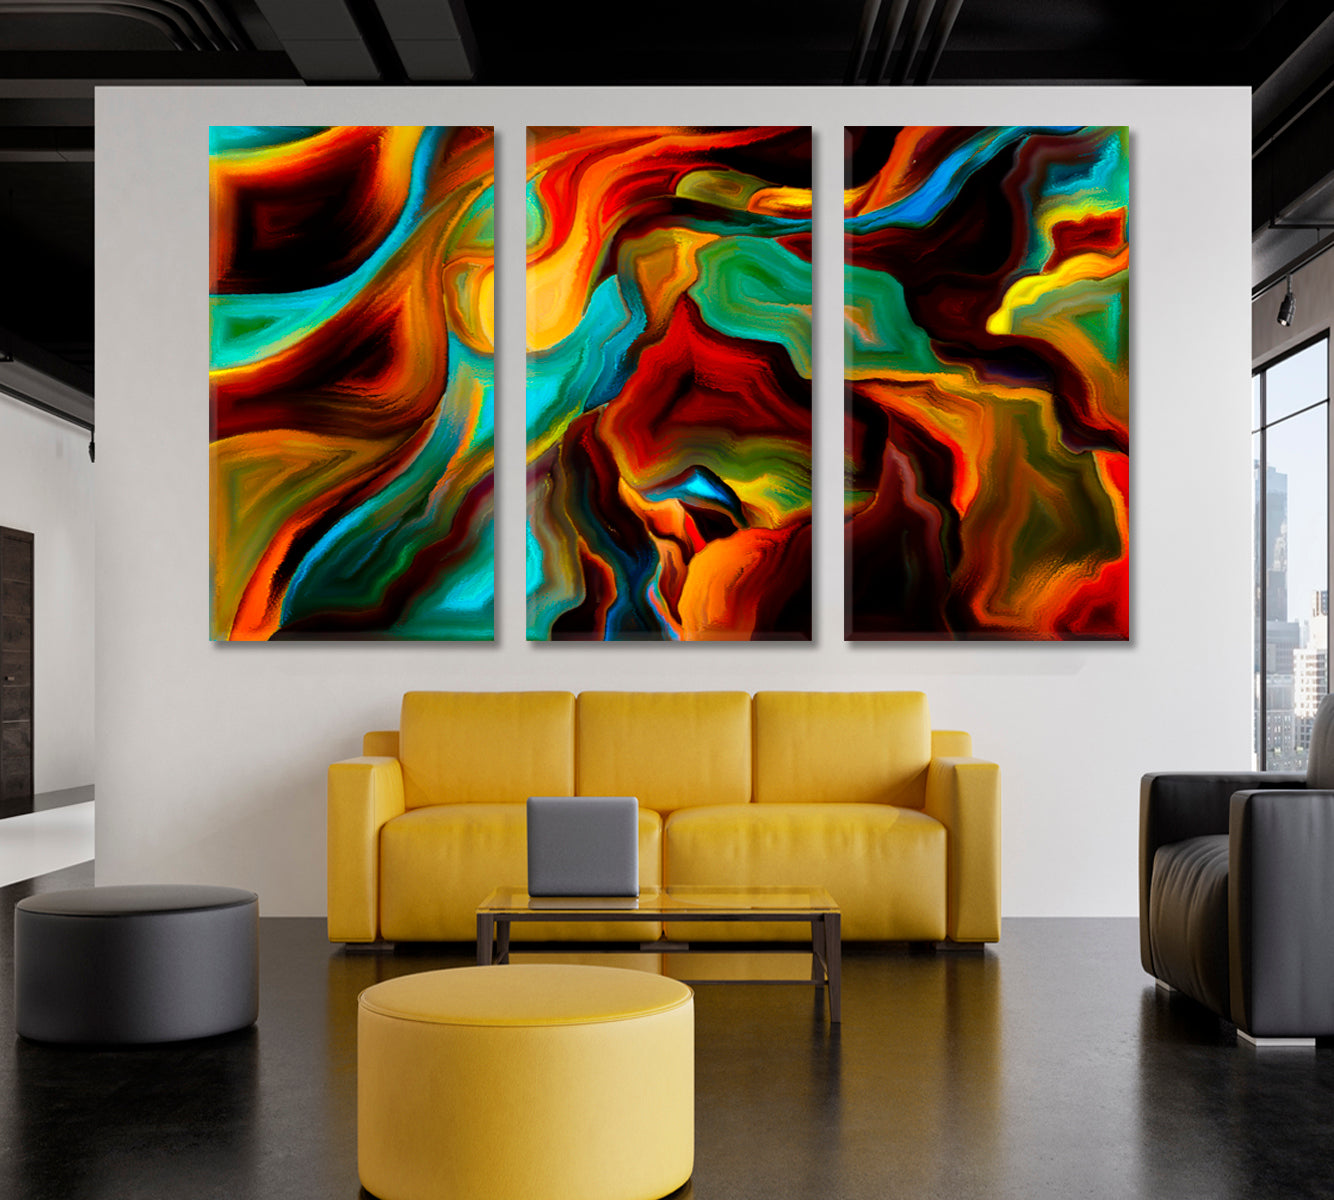 Inside Of Colors And Forms Abstract Design Abstract Art Print Artesty 3 panels 36" x 24" 